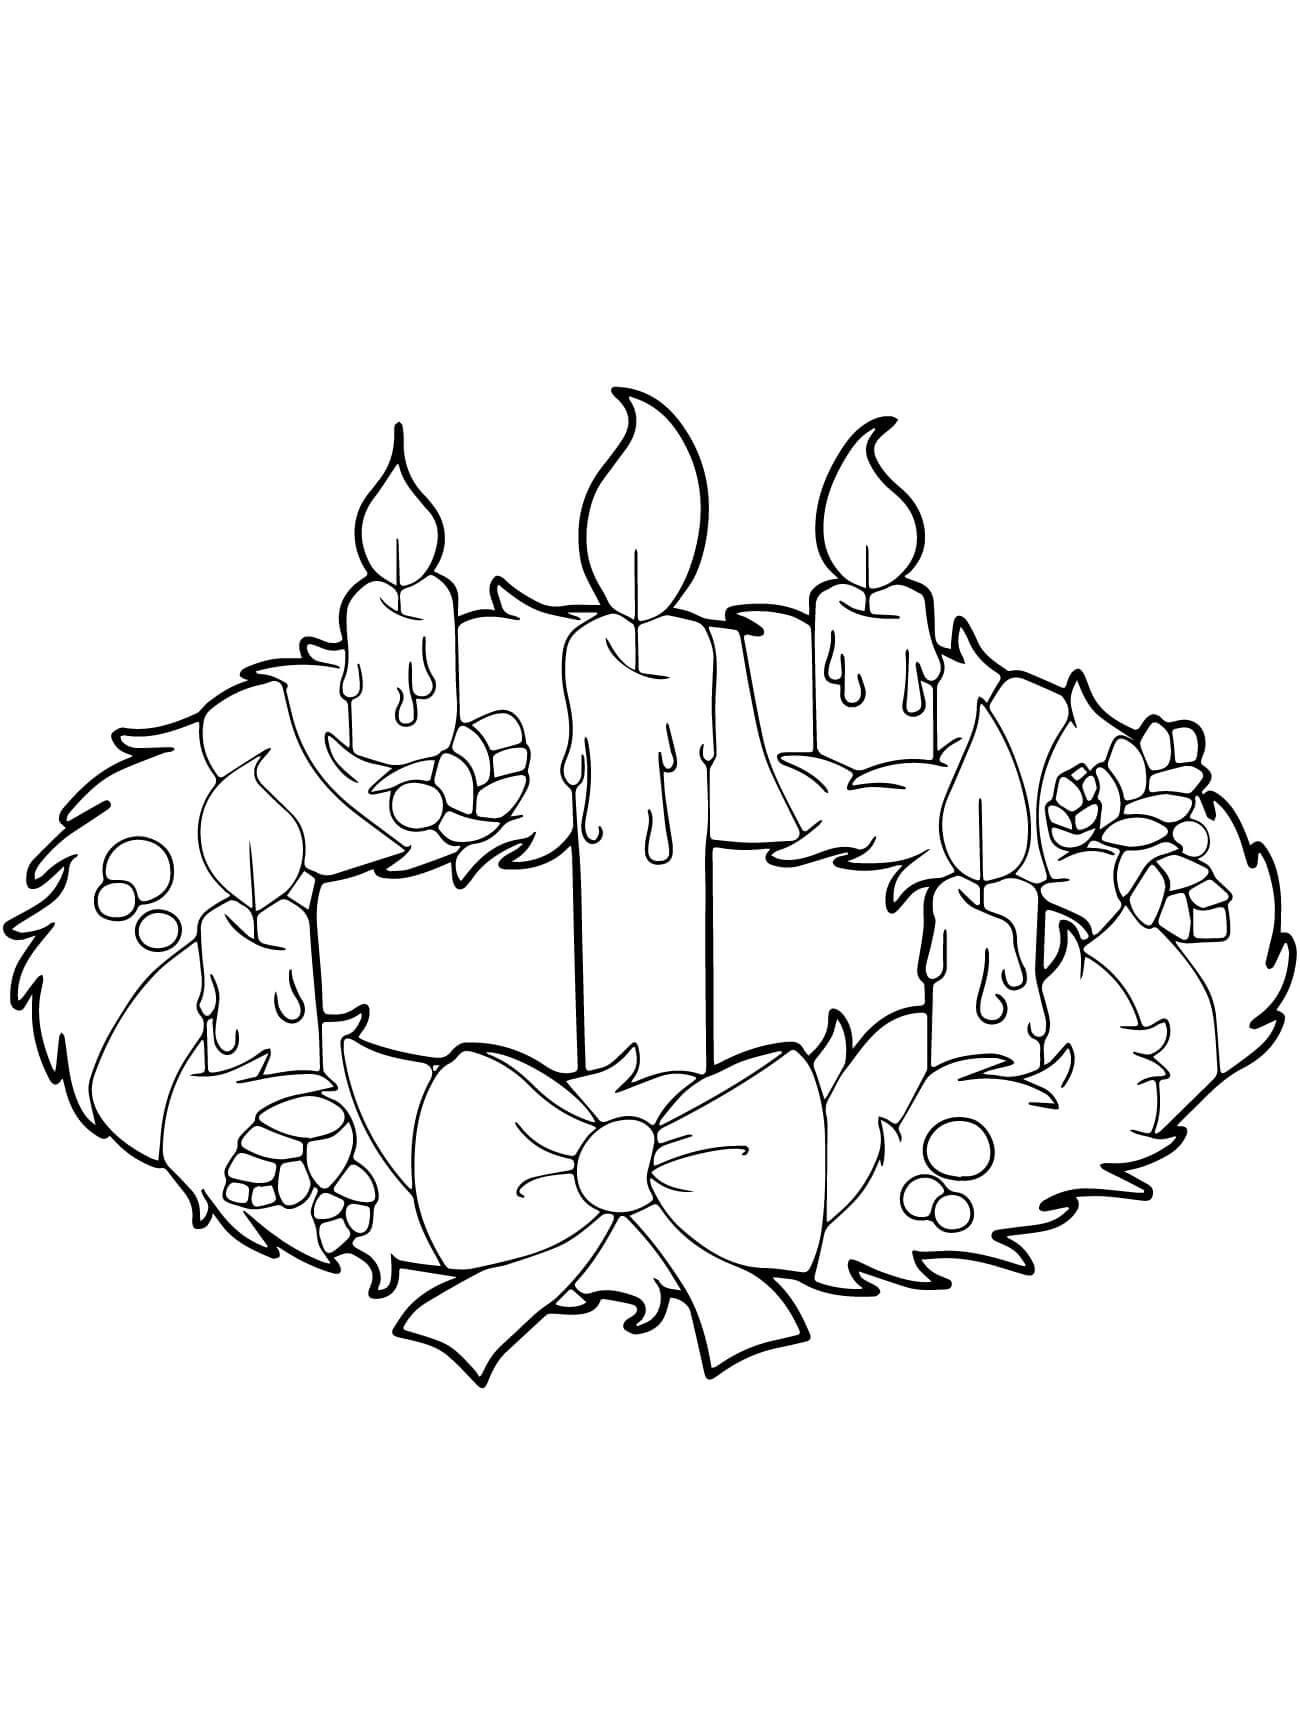 Free Printable Advent Peace Coloring Pages Pdf - Advent Peace Coloring Pages to print